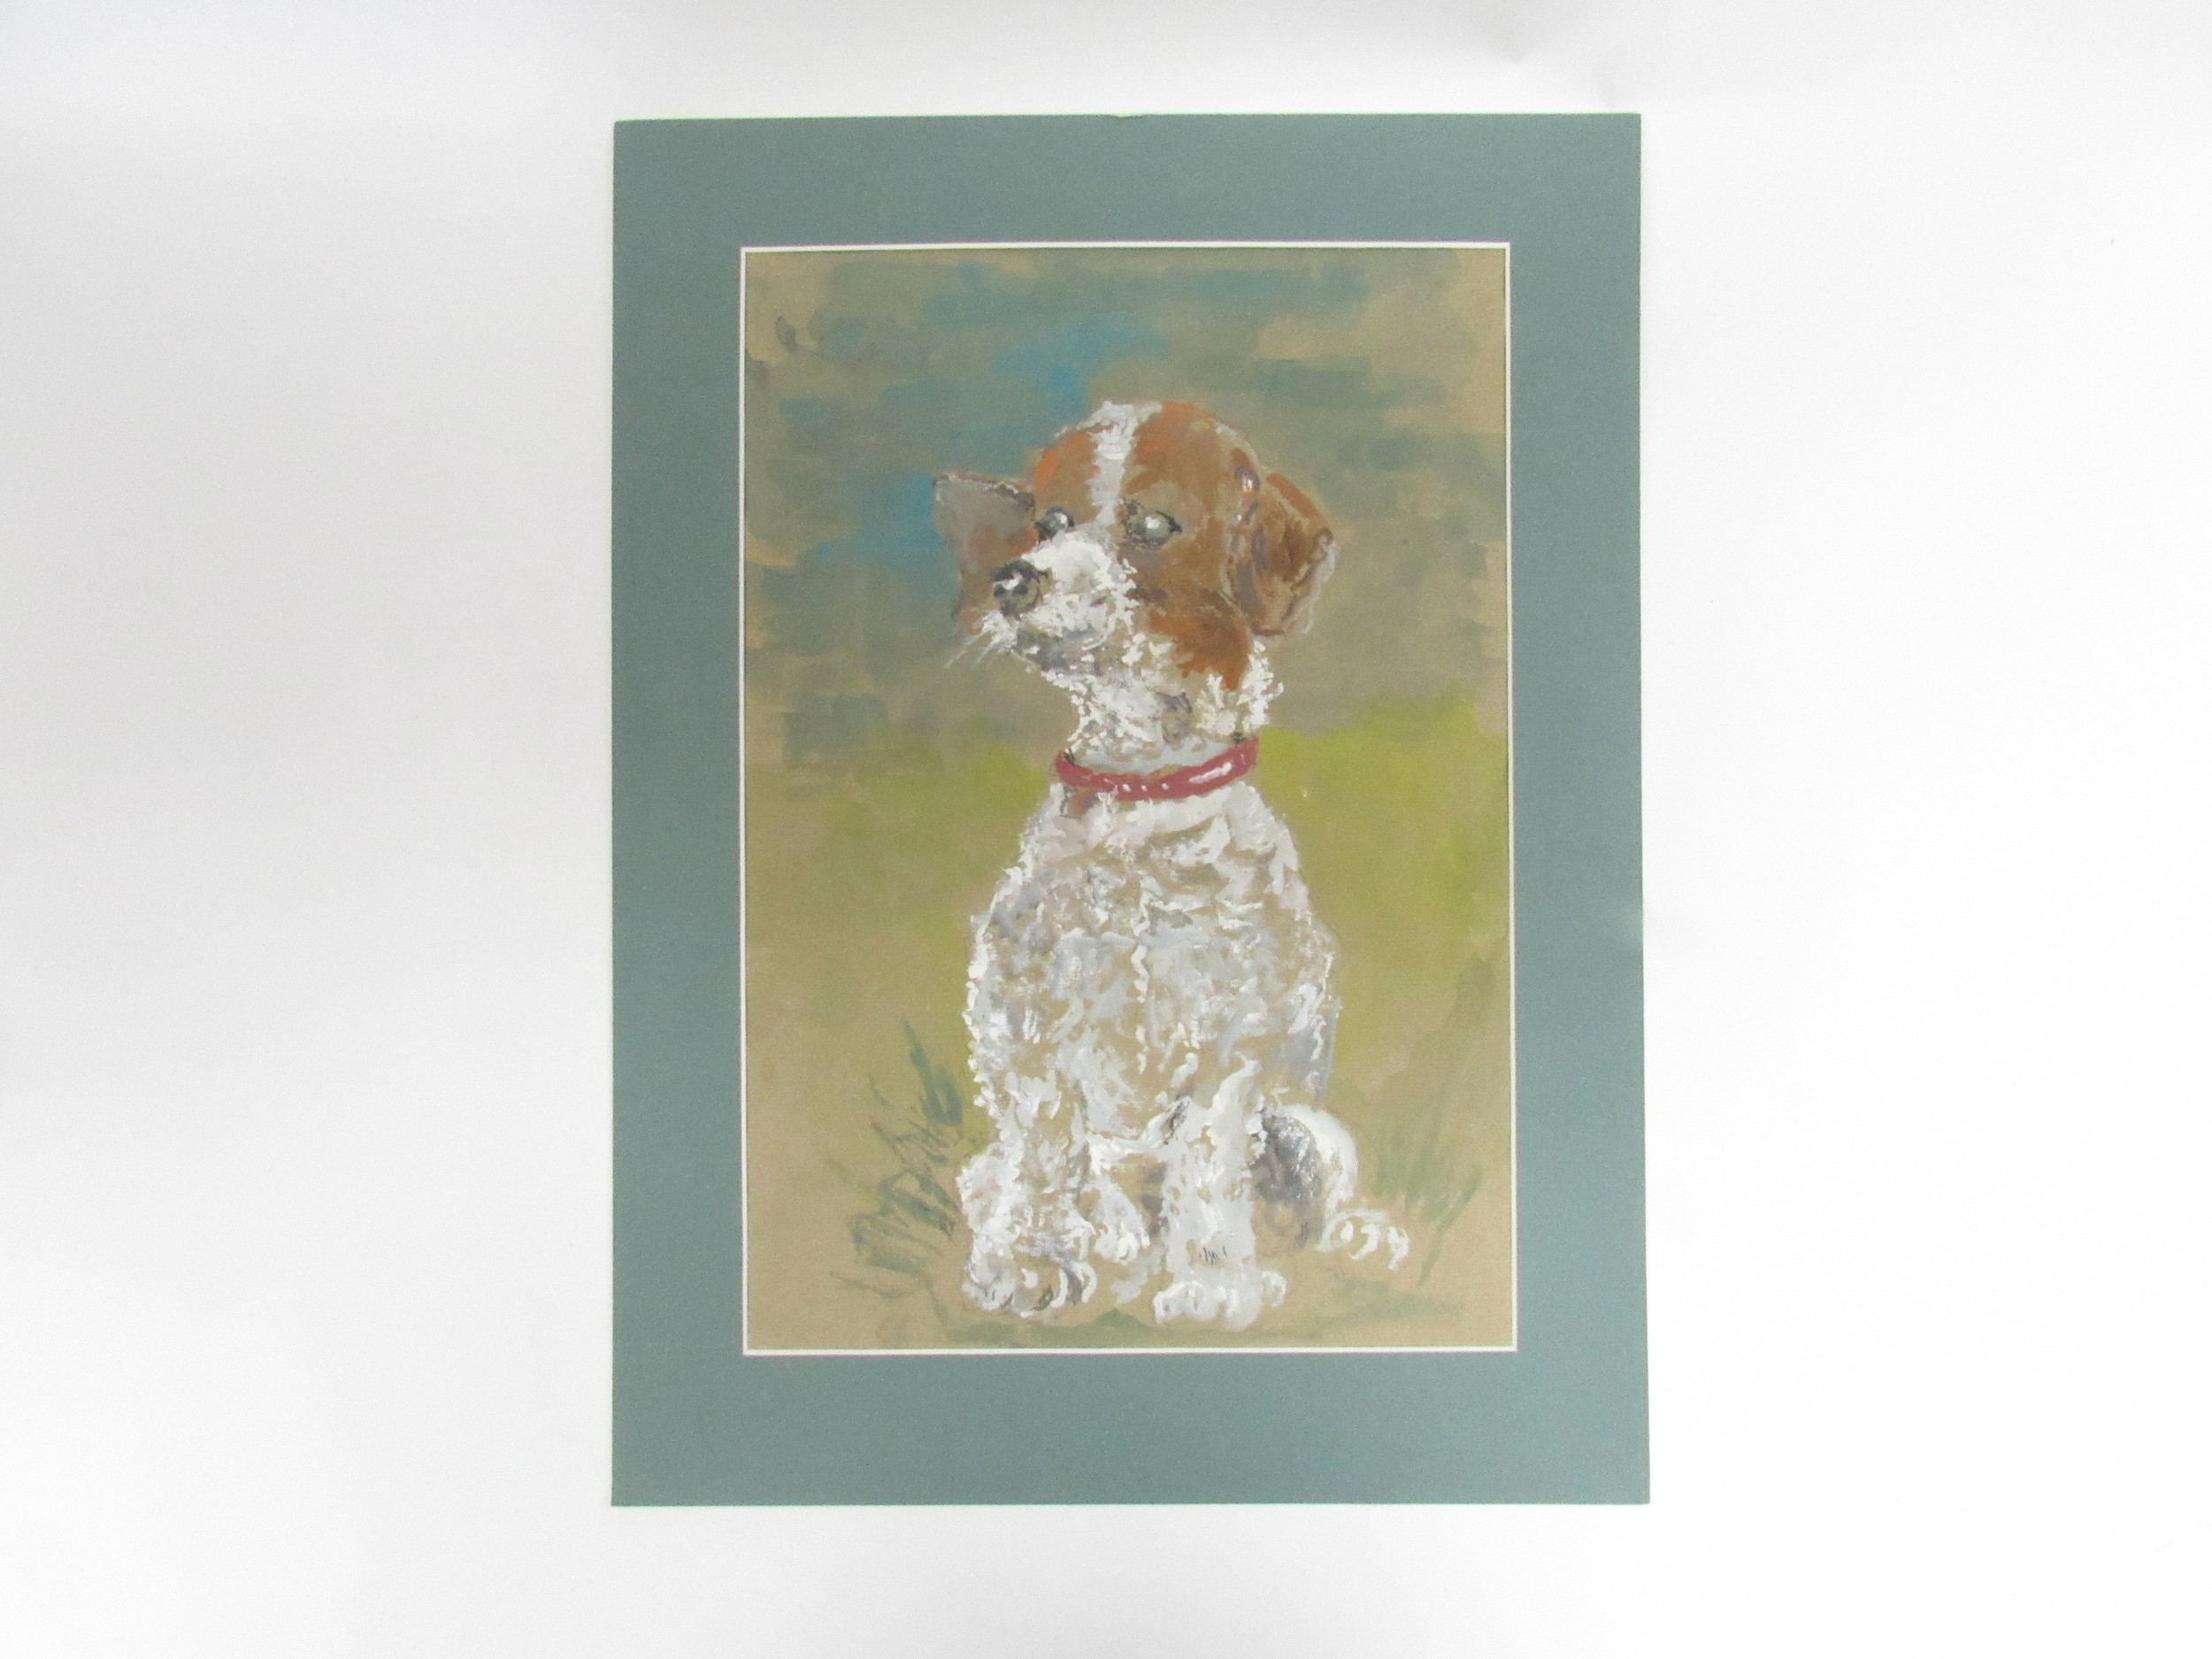 An original painting of a dog in original mount. Image size 37cm x 25.5cm